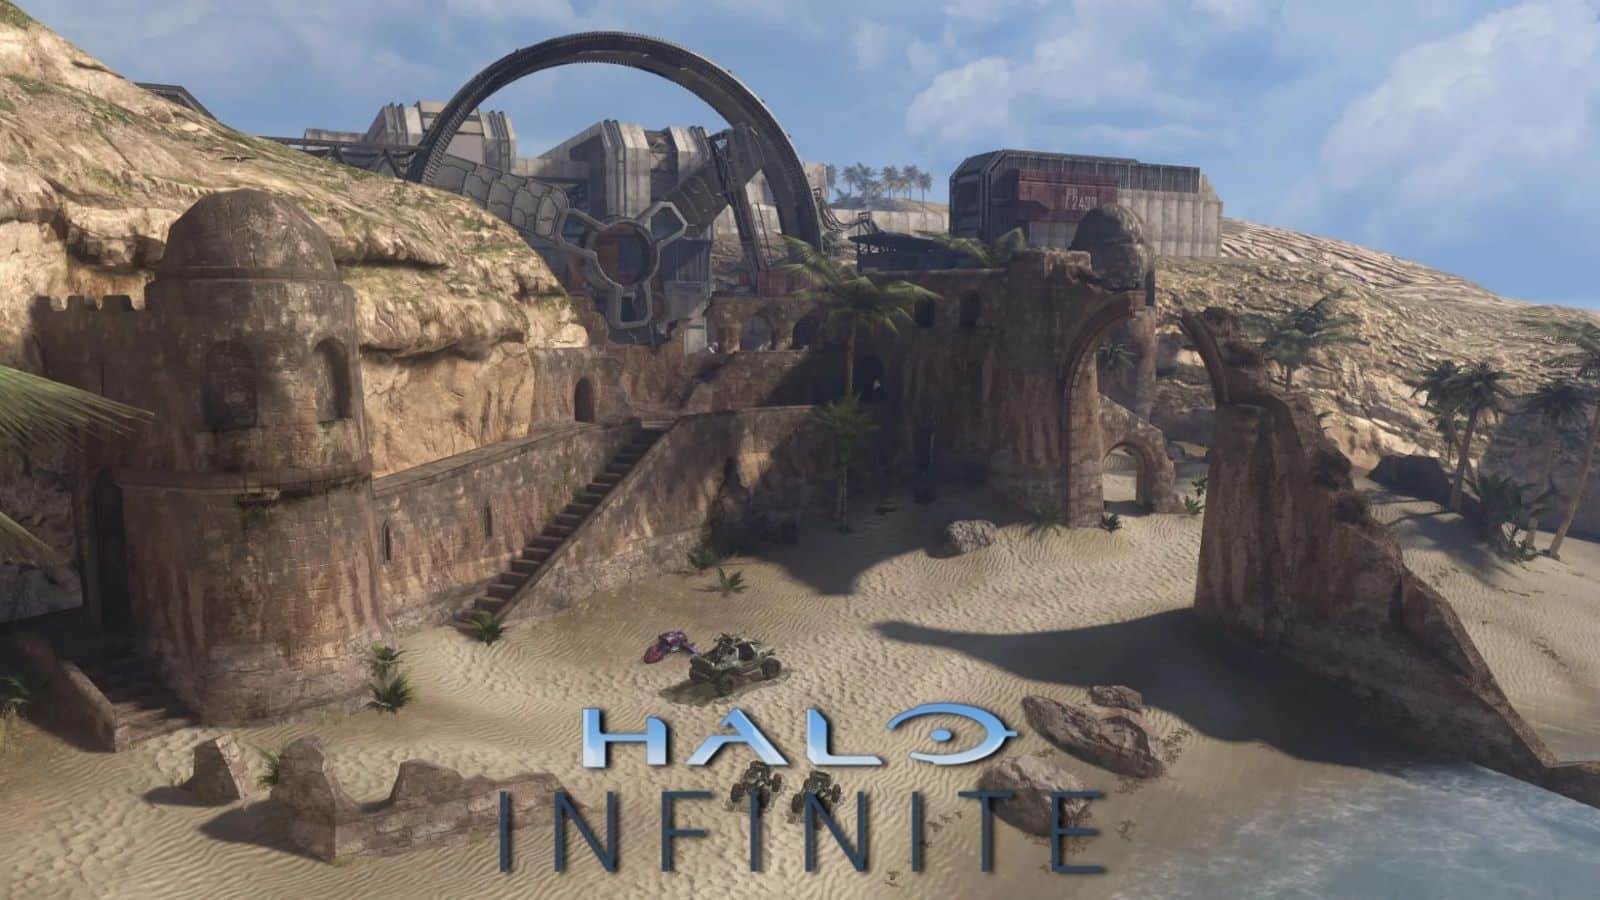 According to Halo Infinite Devs, they are currently working on 10 new maps